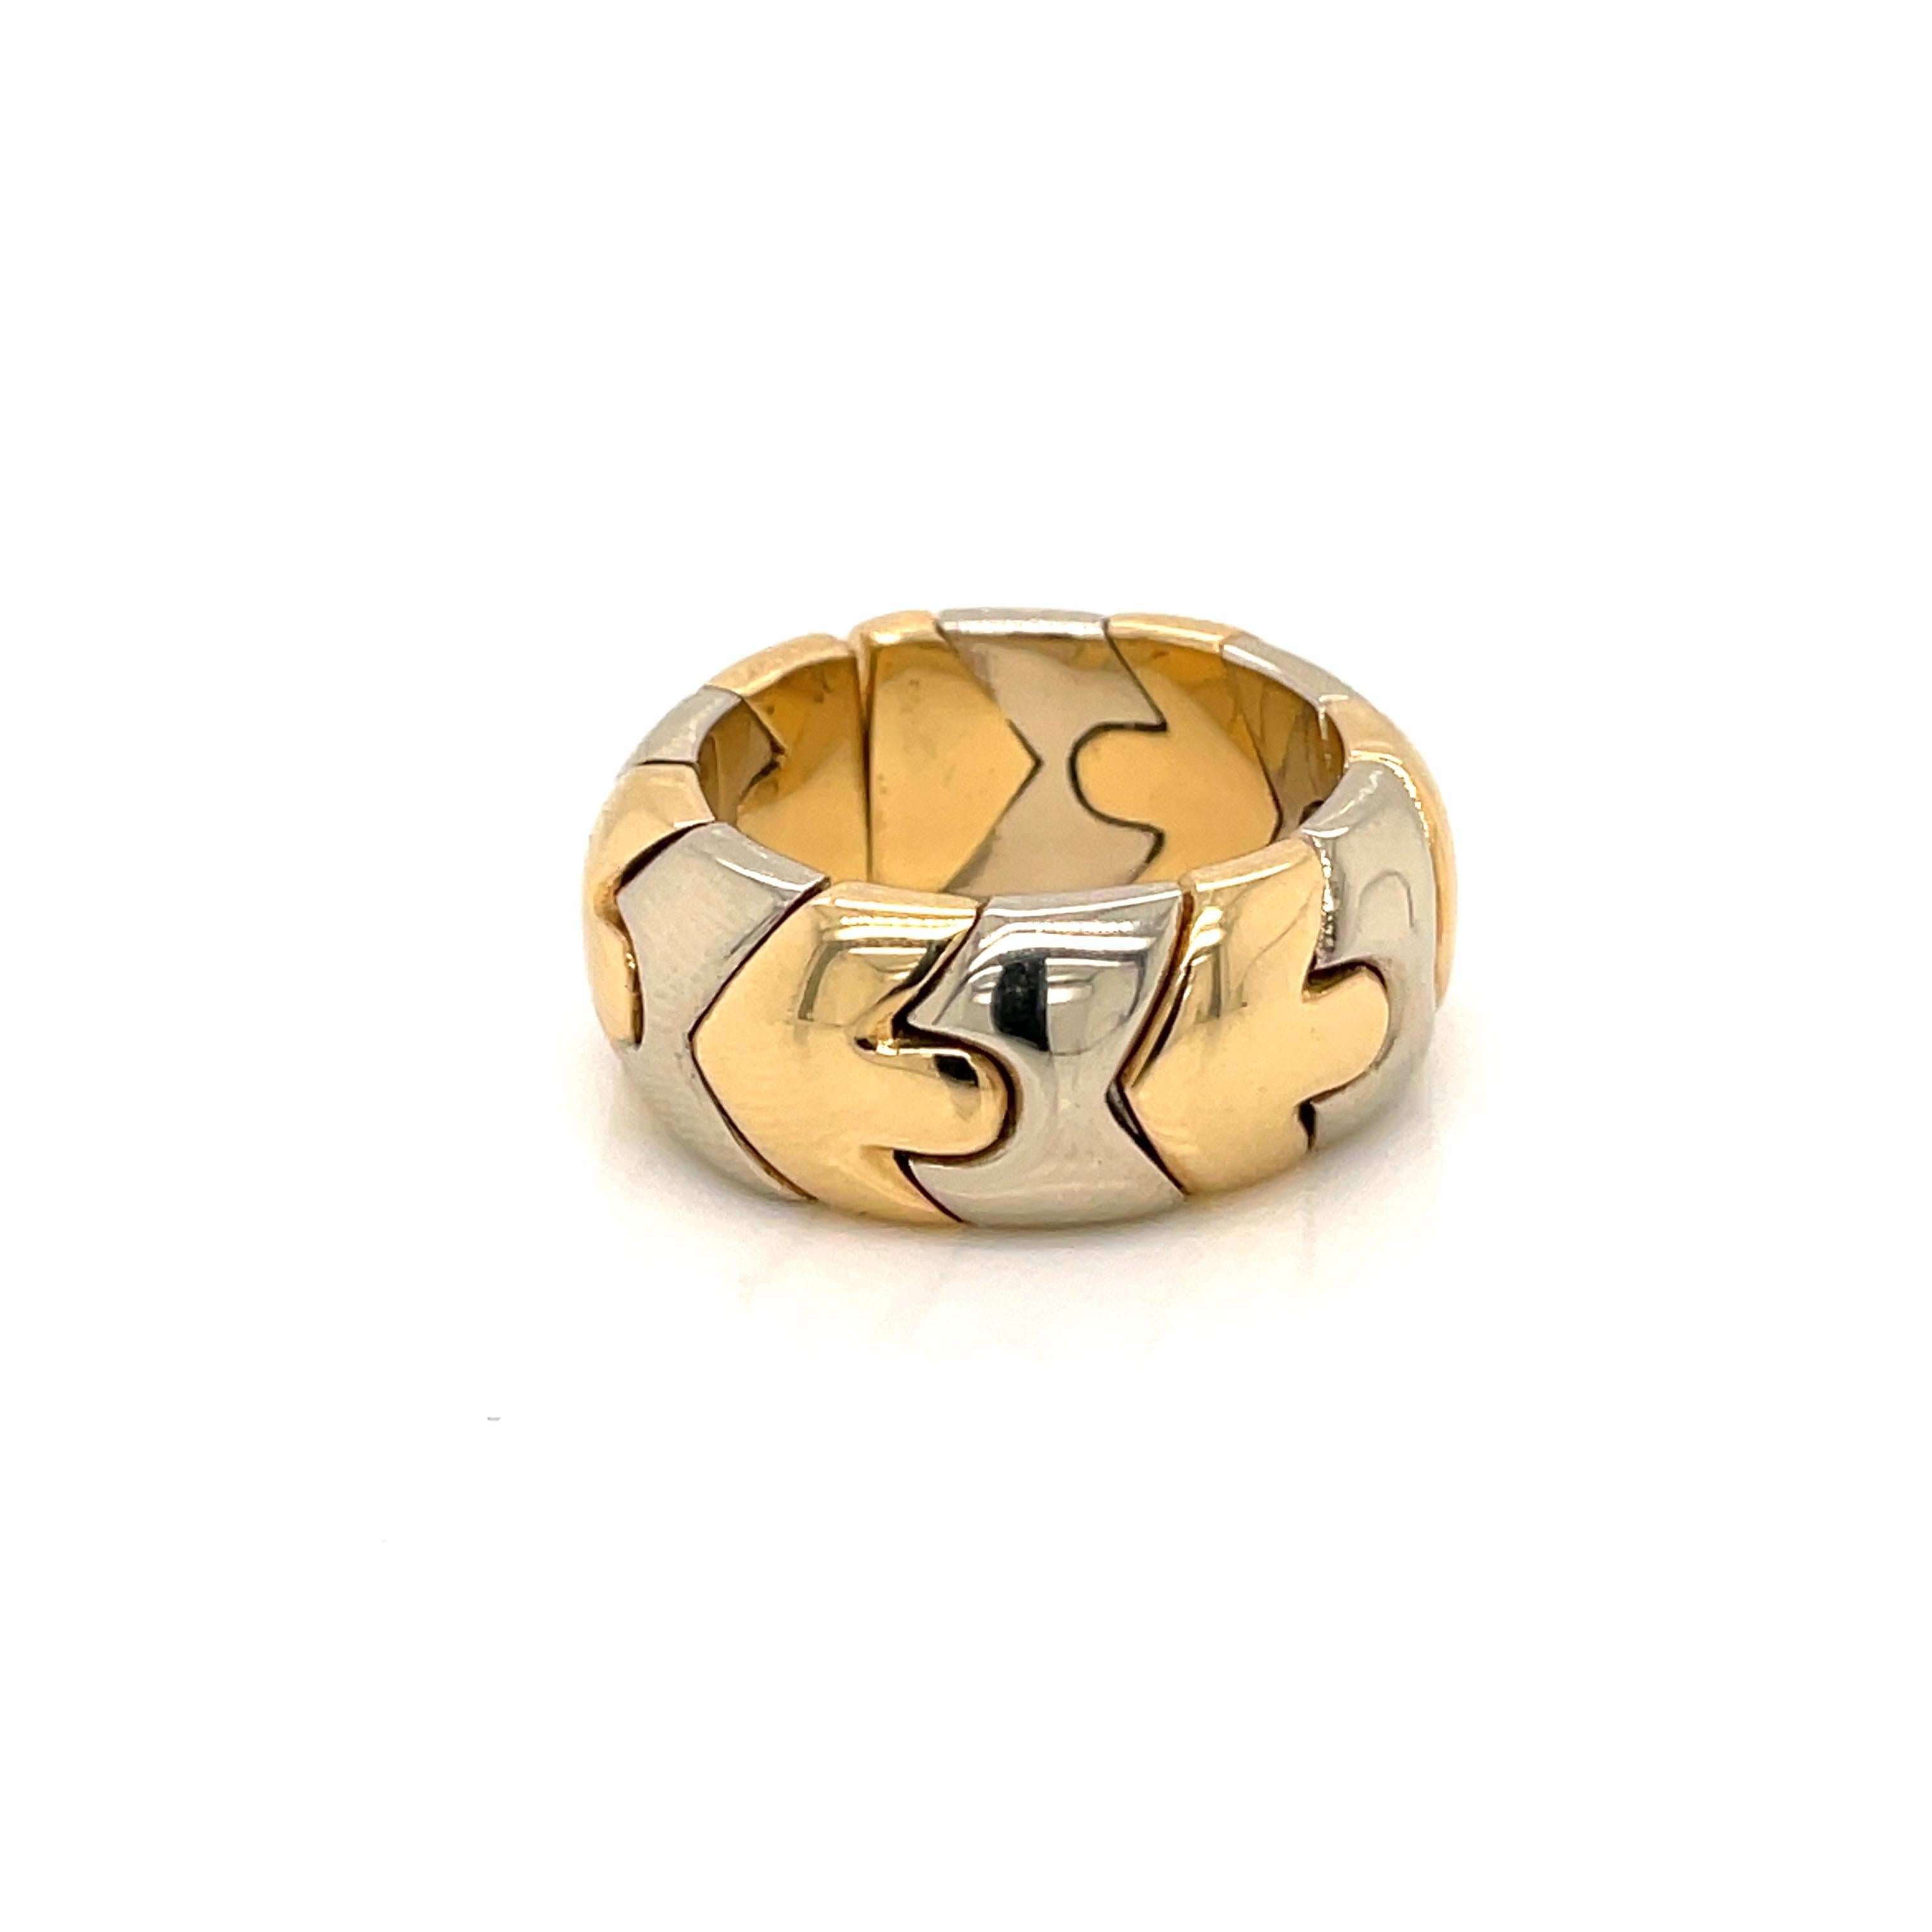 Classic Alveare ring designed by Bvlgari.

A geometric flexible Alveare ring band, crafted in Rome Italy by the house of Bulgari in two tones of solid yellow and white 18 k gold. Dated 1980'.

Has a total weight of 14,6 grams. The actual size is 6,